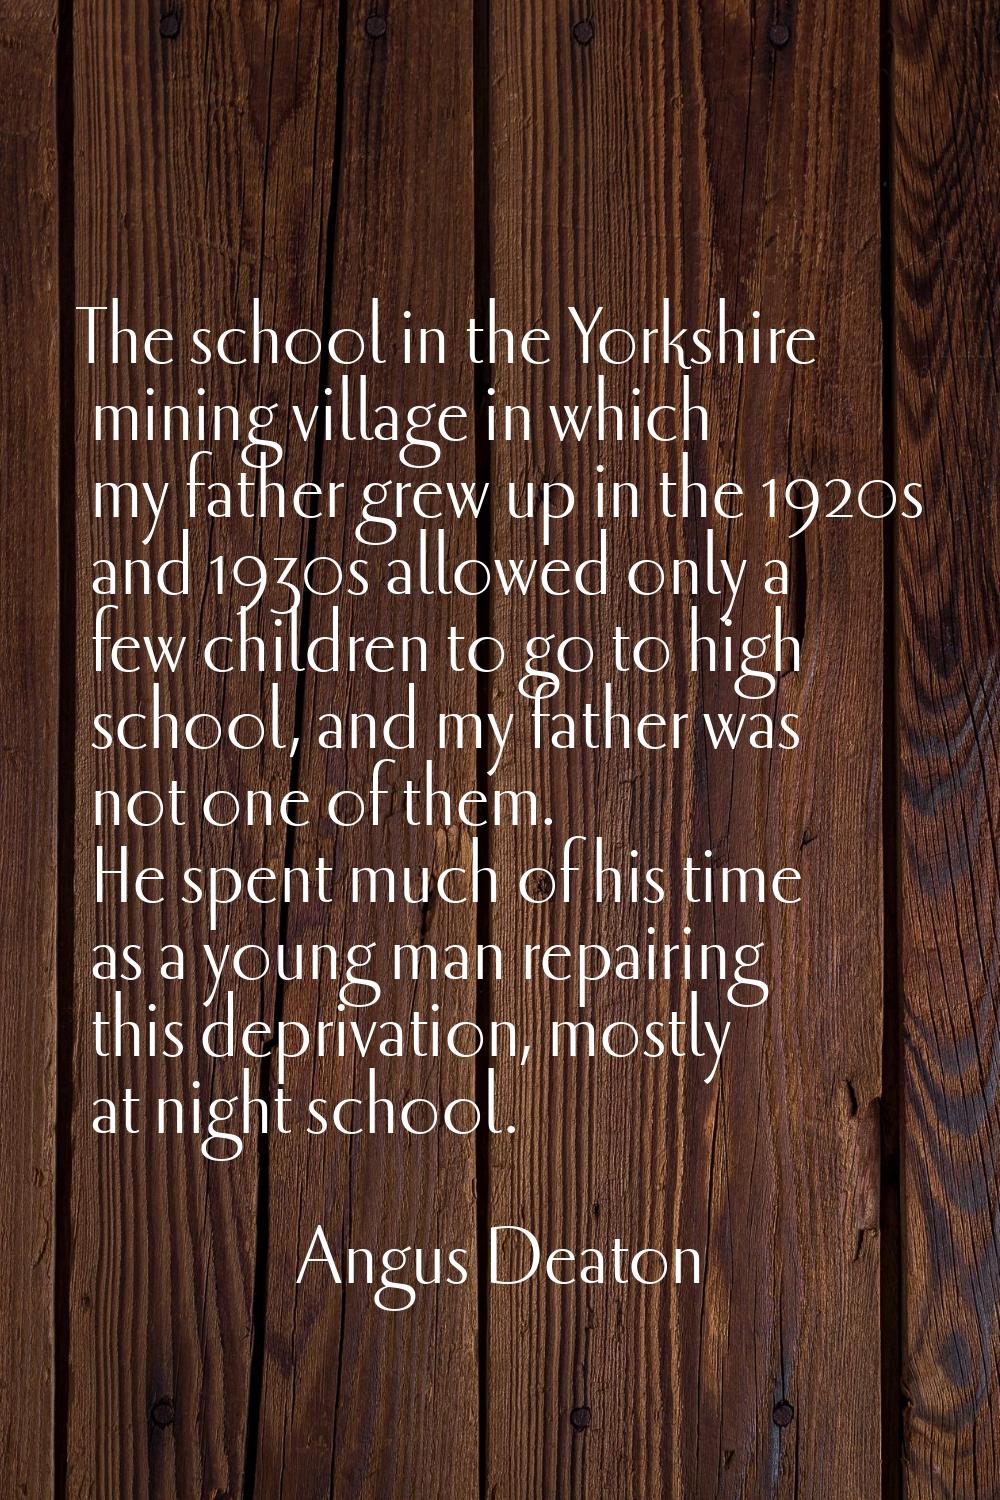 The school in the Yorkshire mining village in which my father grew up in the 1920s and 1930s allowe